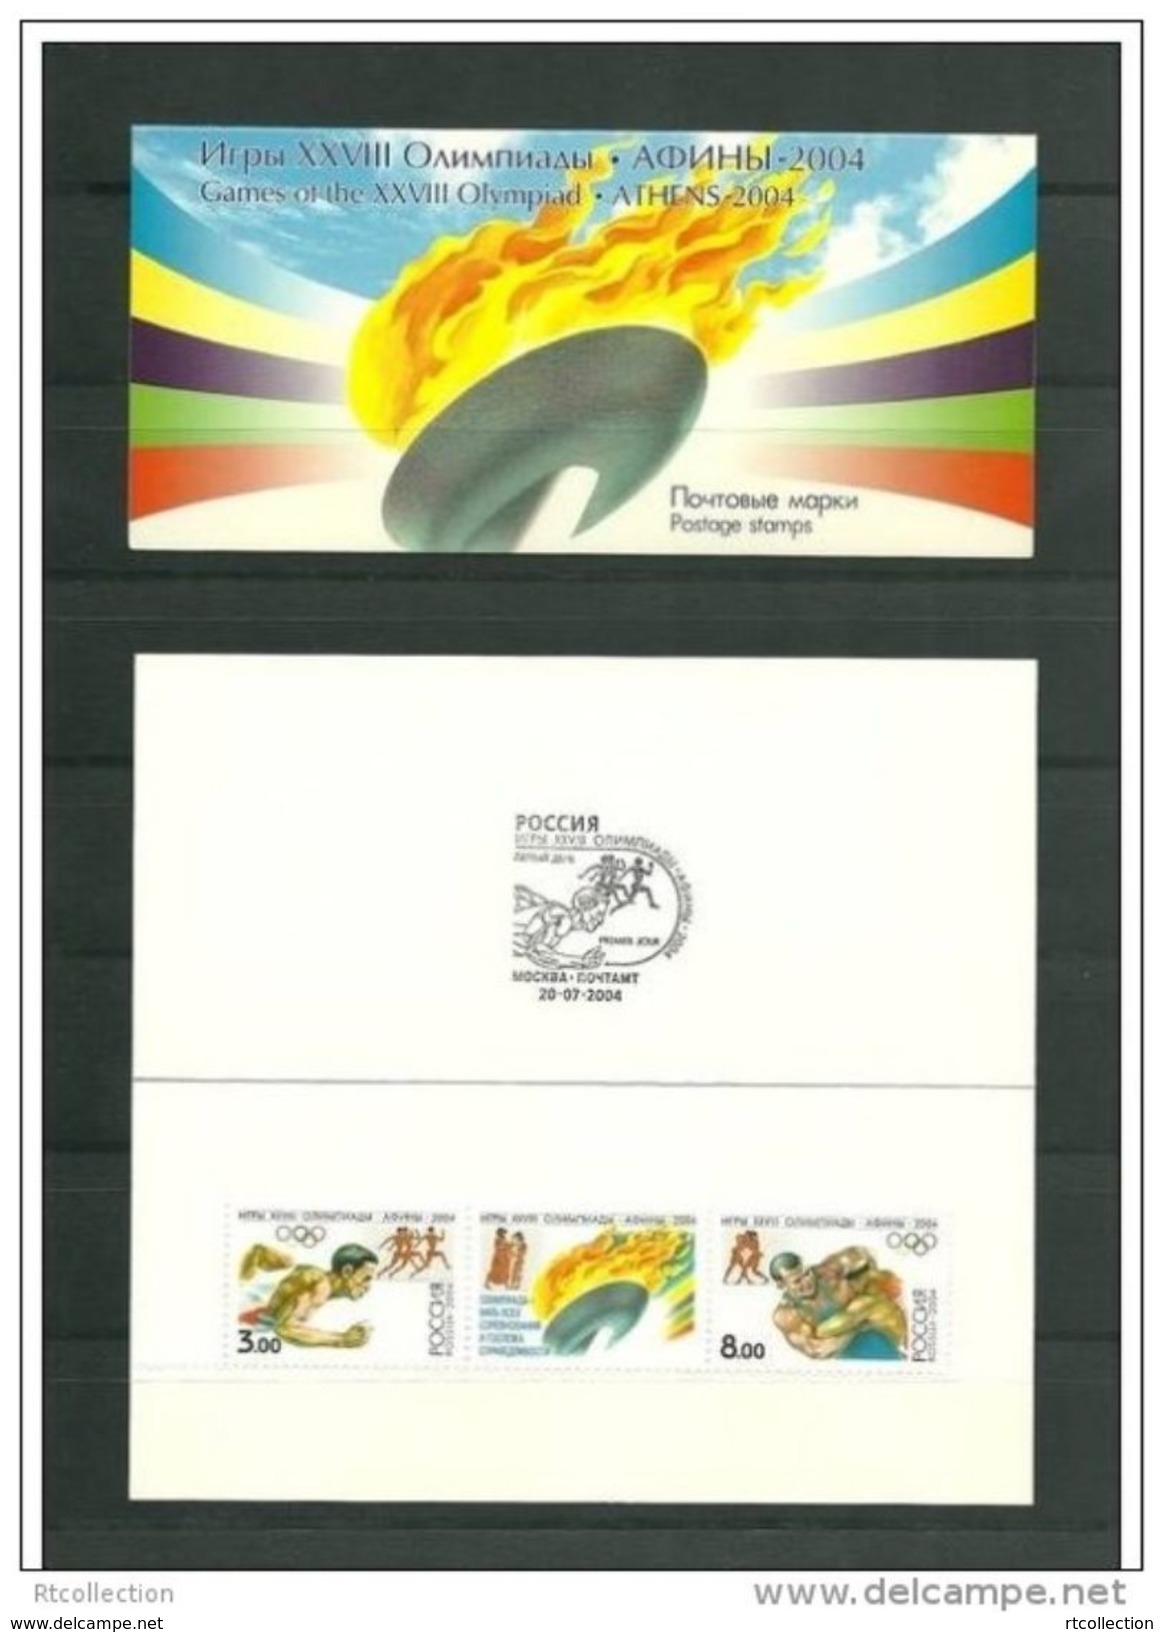 Russia 2004 Booklet Summer Olympic Game Athens Sports Running Wrestling Olympiad Flame Greek Poem Art Stamps Mi 1190-91 - Collezioni